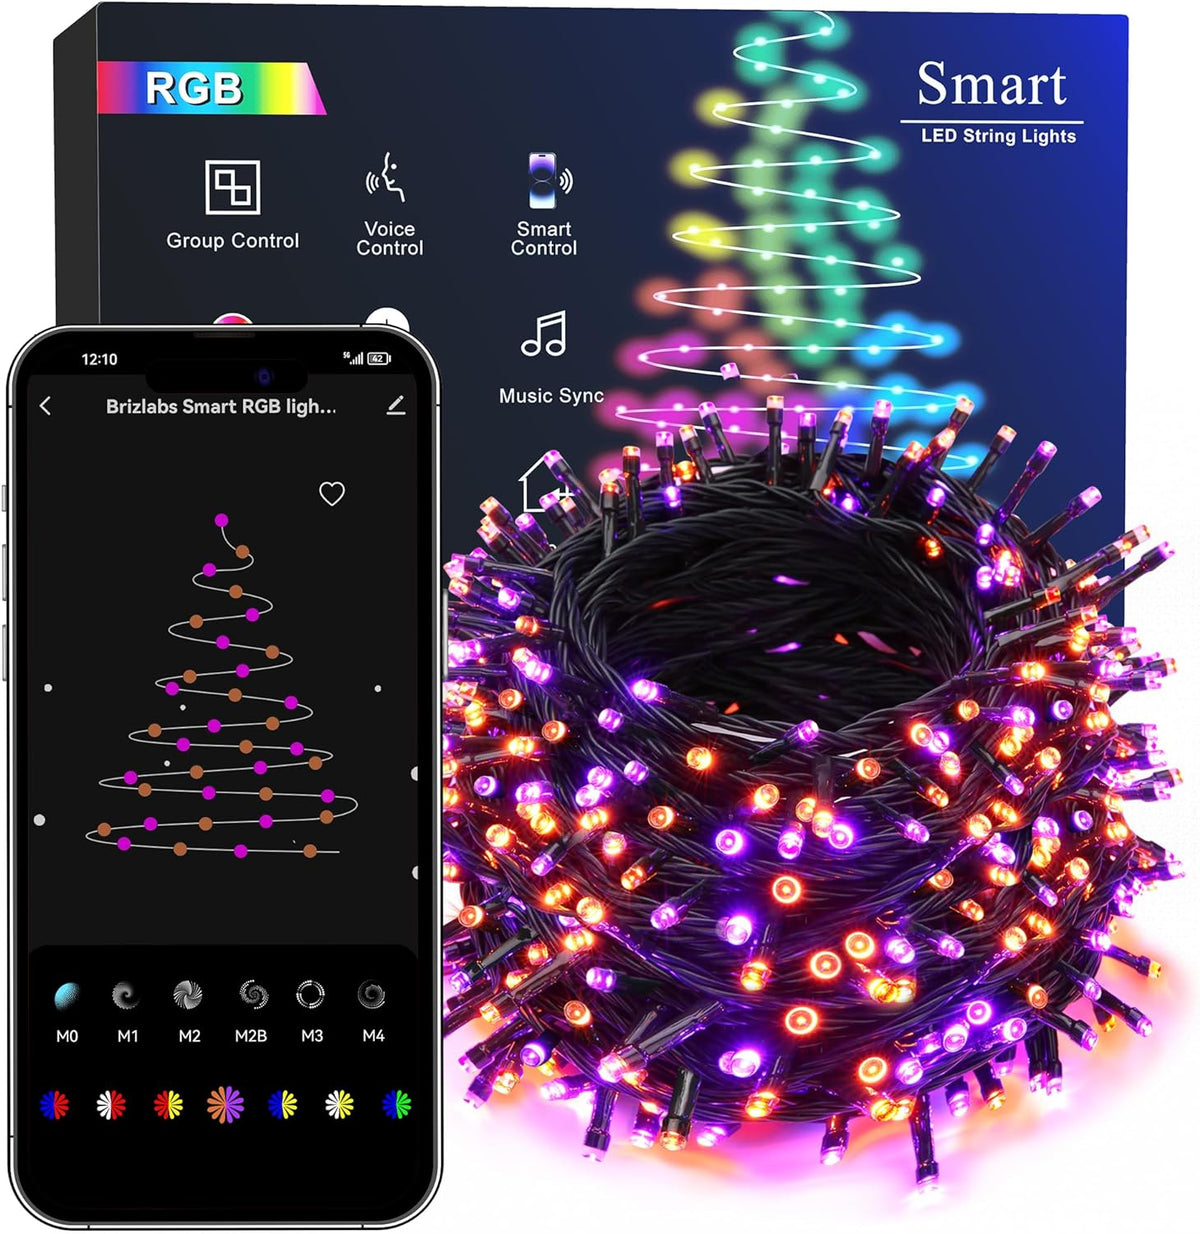 BrizLabs Smart Christmas Lights, 196ft 600 LED Smart WiFi Color Changing String Lights App Controlled, RGB Christmas Tree Lights Work with Alexa & Google Home for Halloween Indoor Outdoor Decor